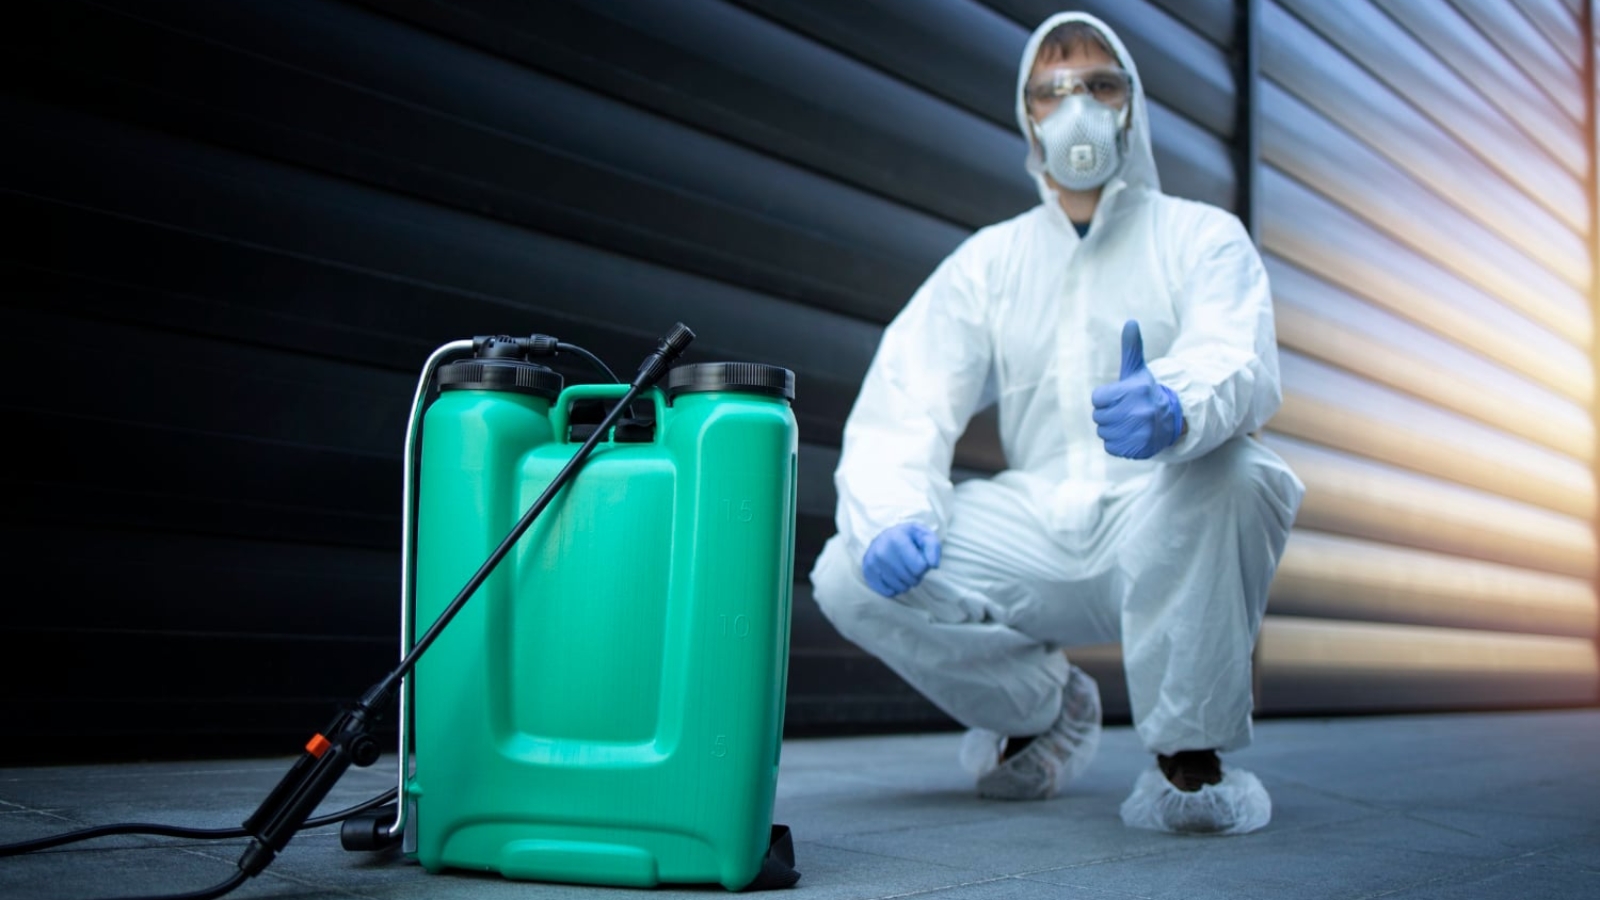 exterminator-white-protective-uniform-standing-by-reservoir-with-chemicals-sprayer